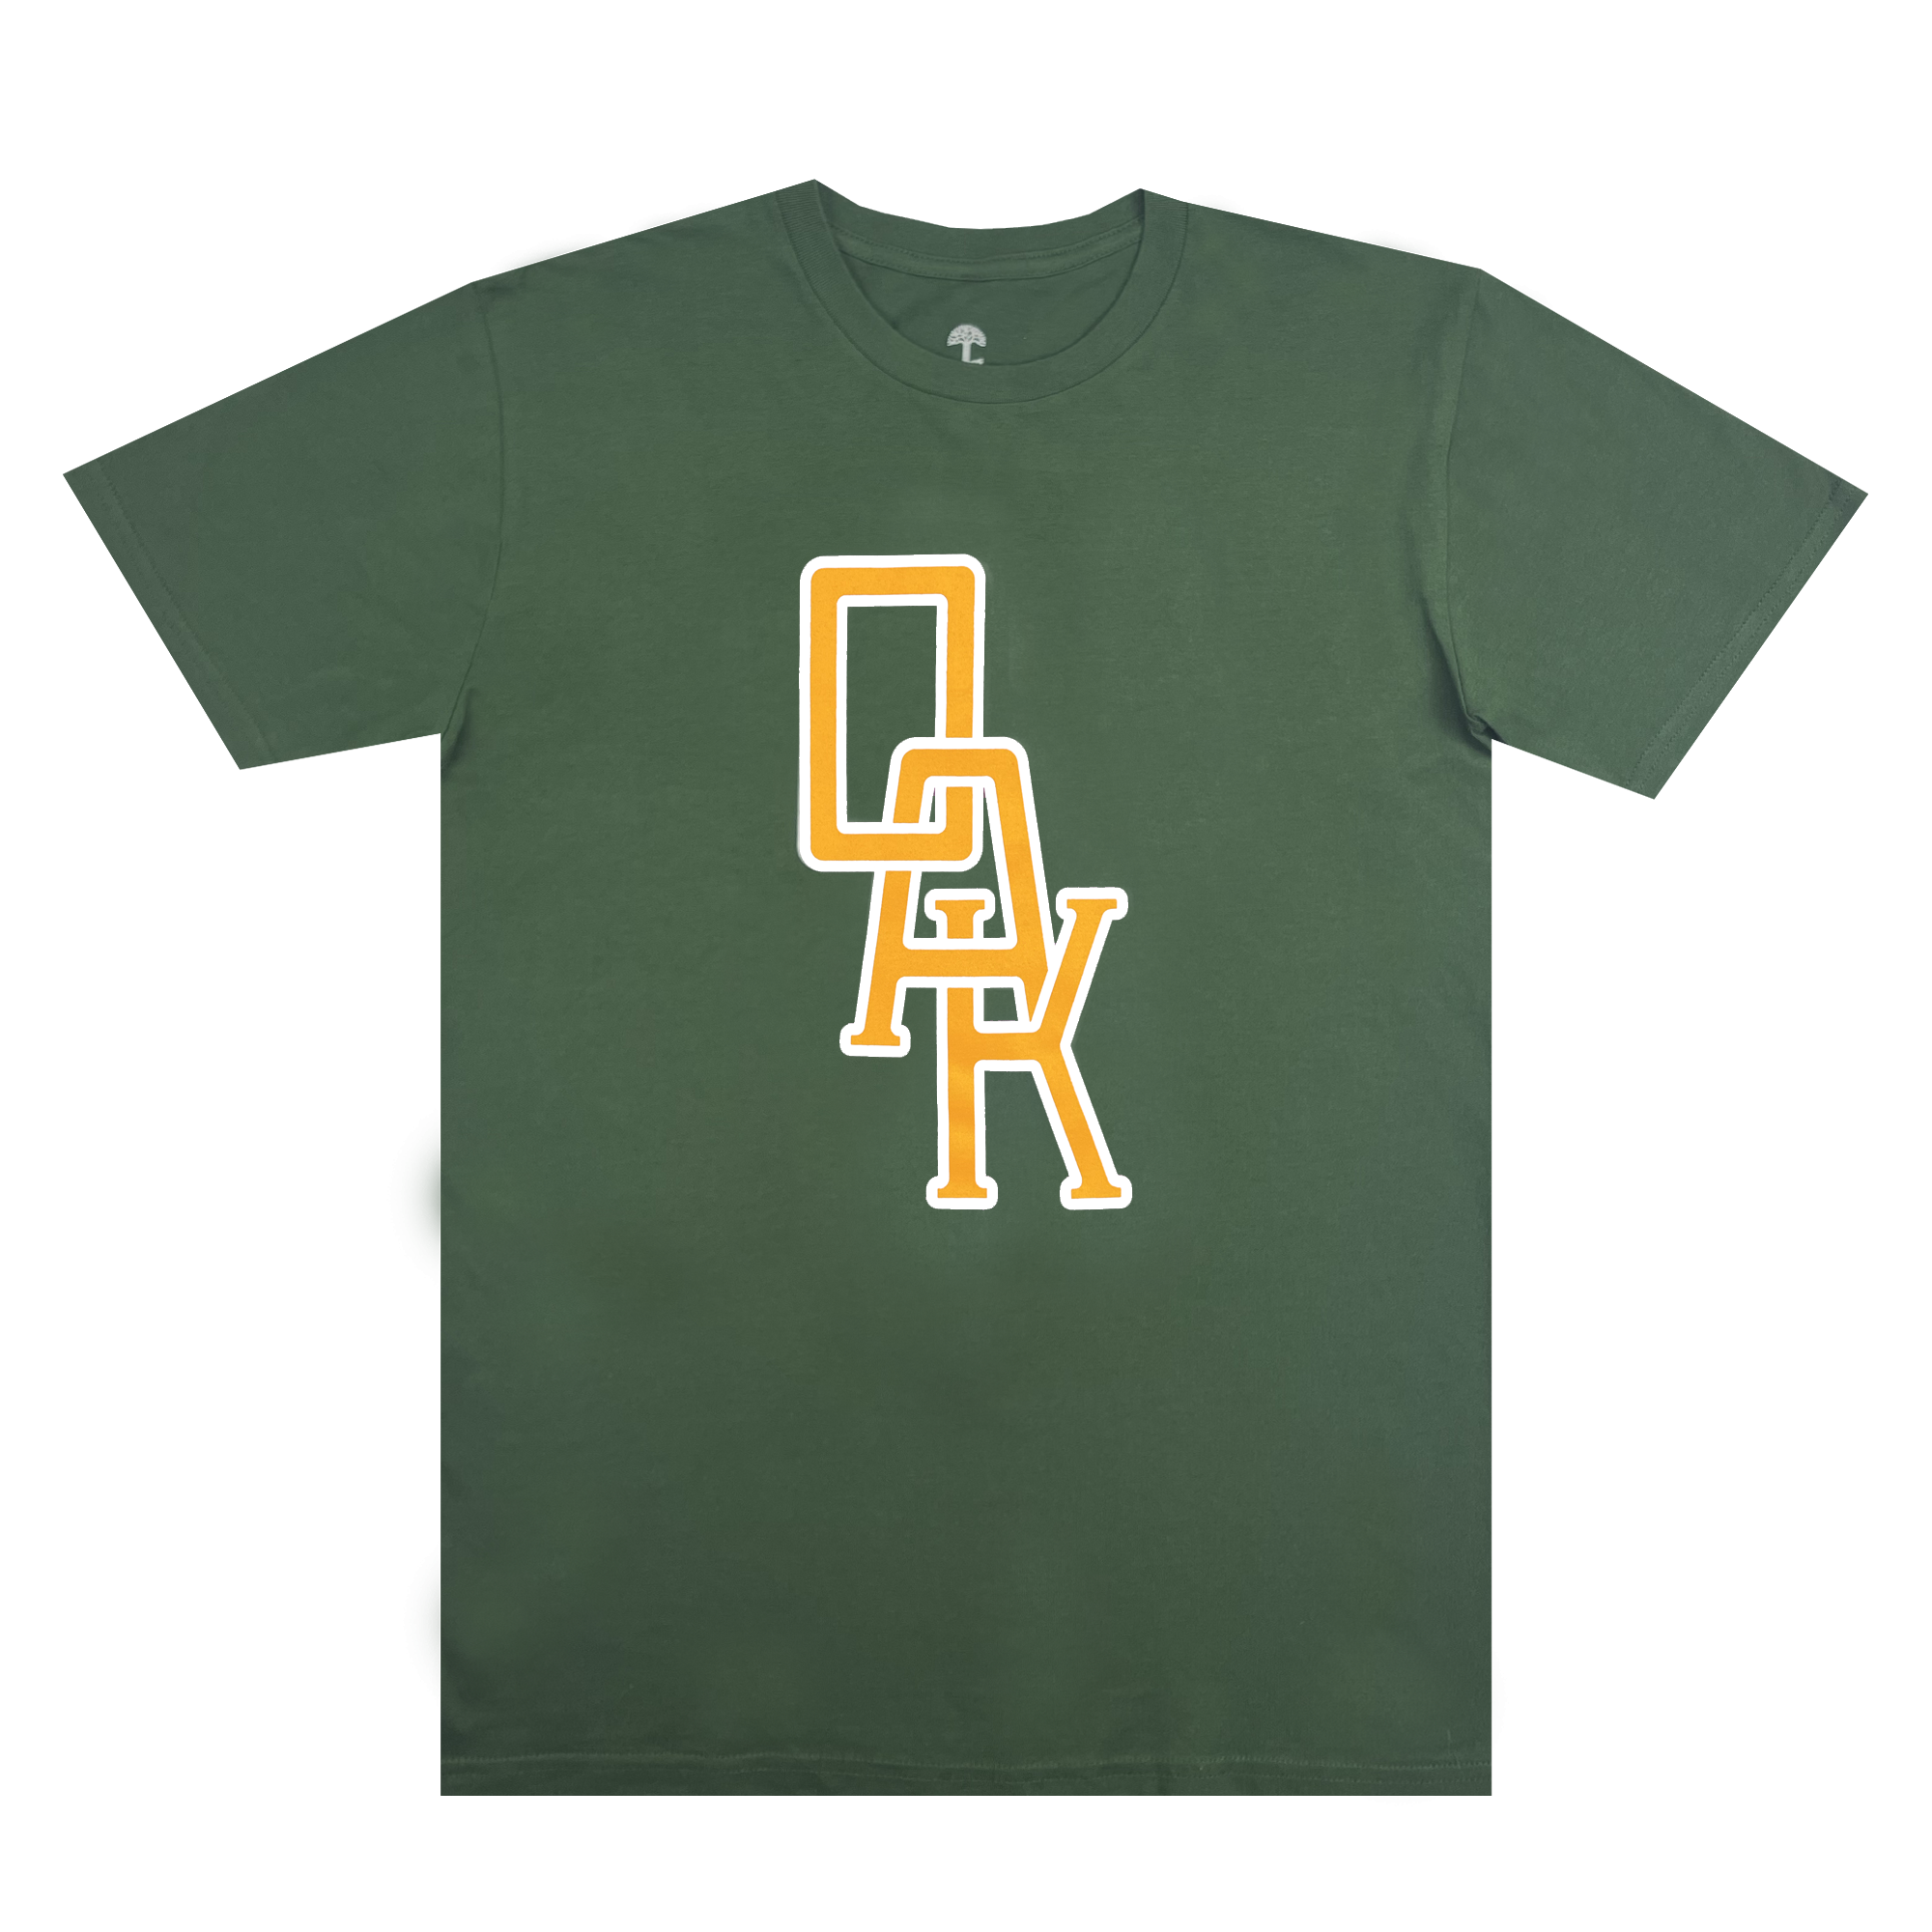 Front view of a forest green t-shirt with OAK monogram design centered in yellow and white.